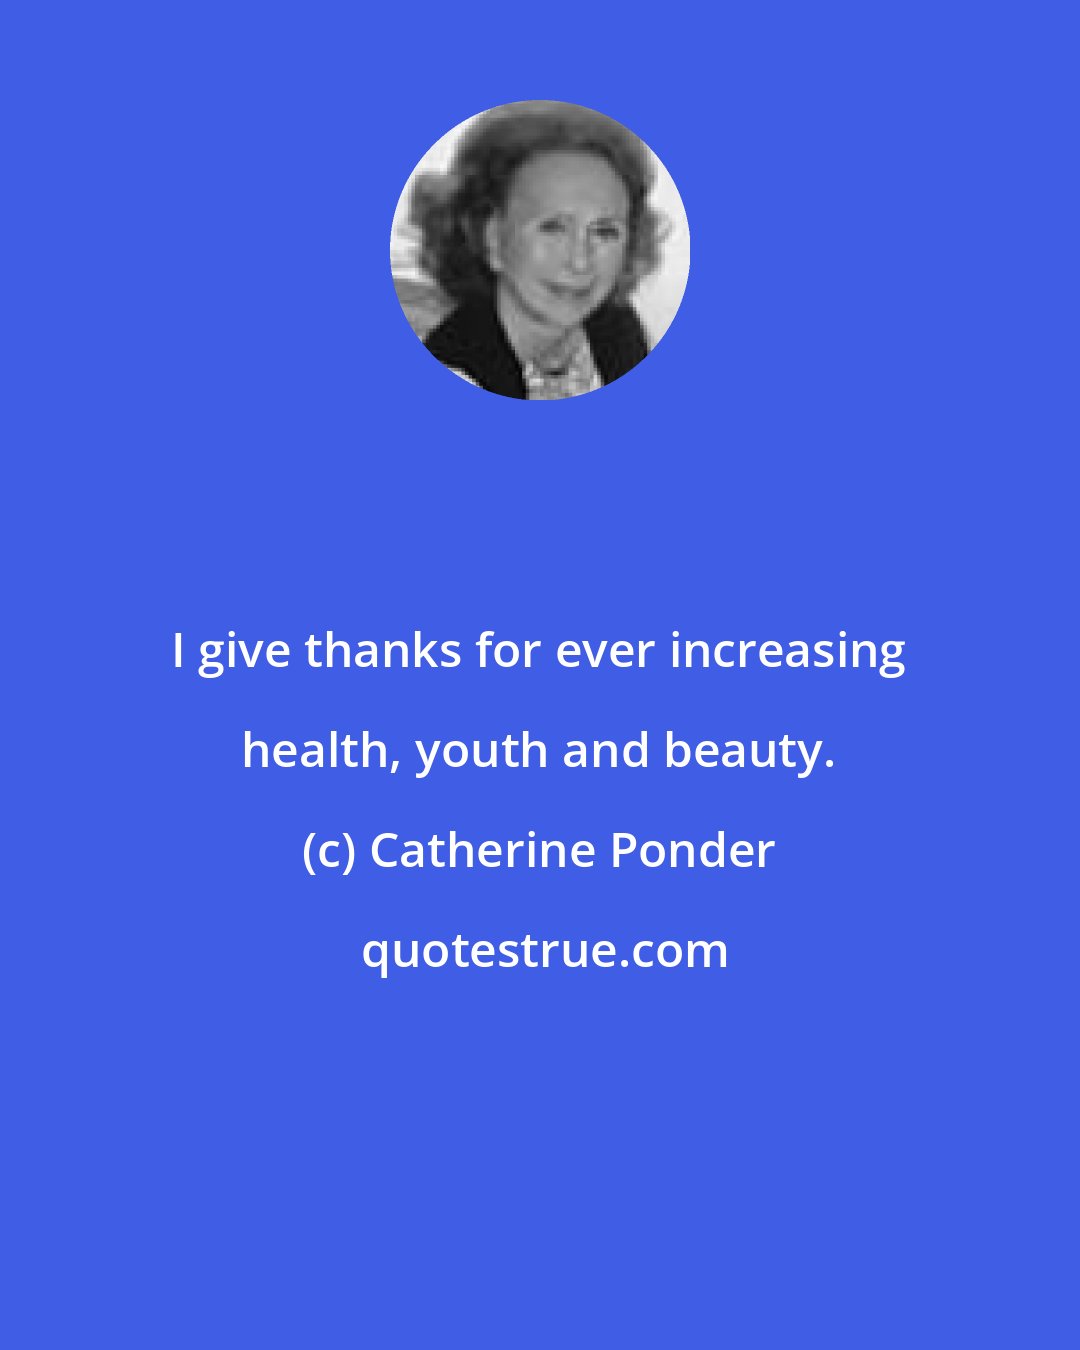 Catherine Ponder: I give thanks for ever increasing health, youth and beauty.